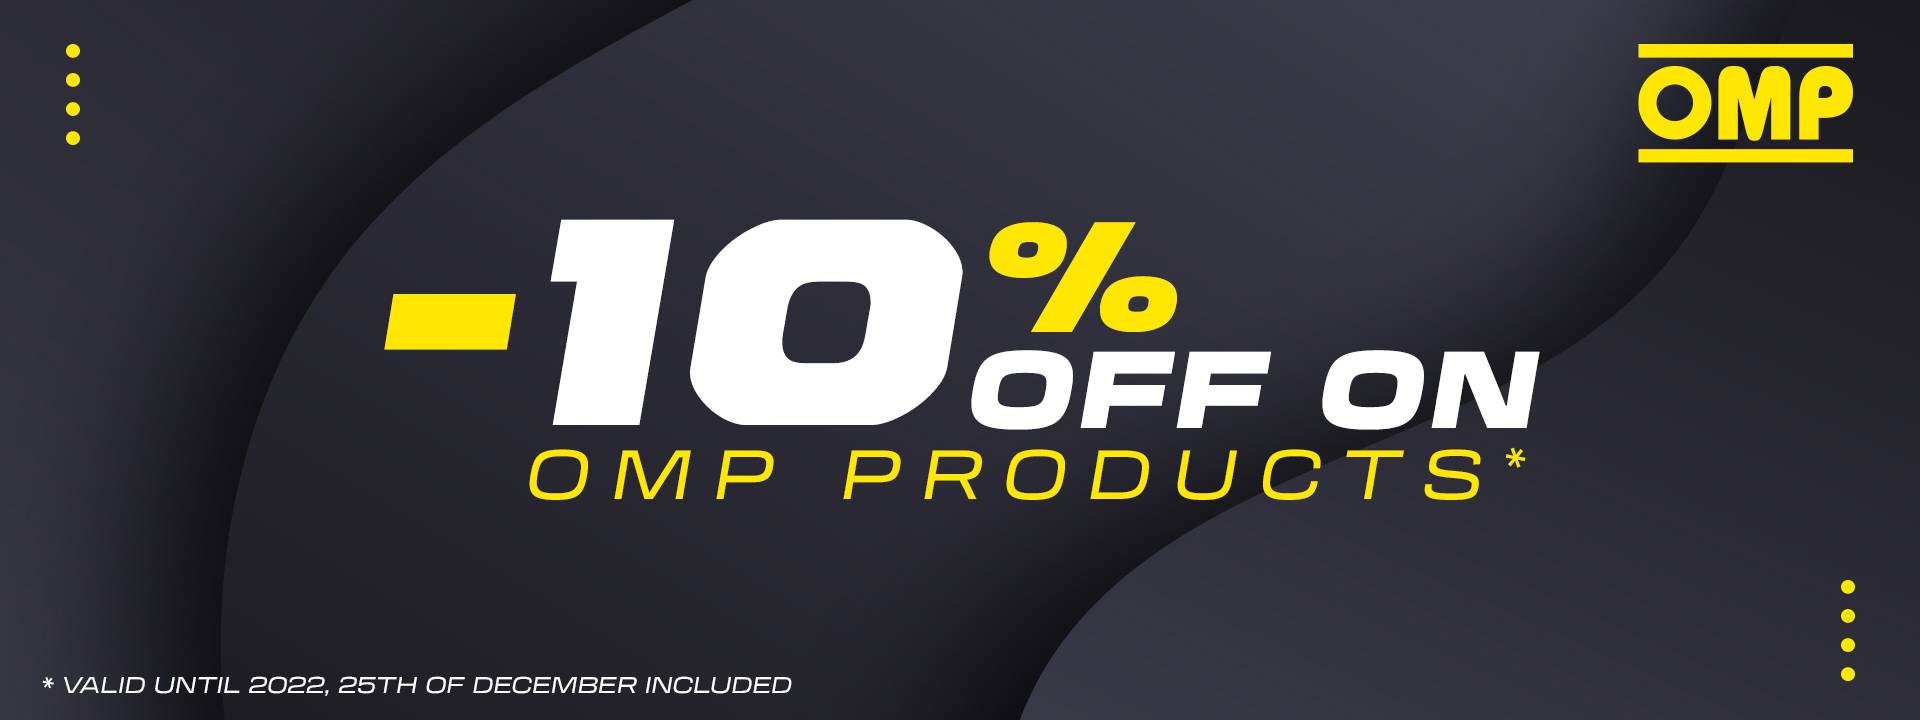 Special offer on OMP products